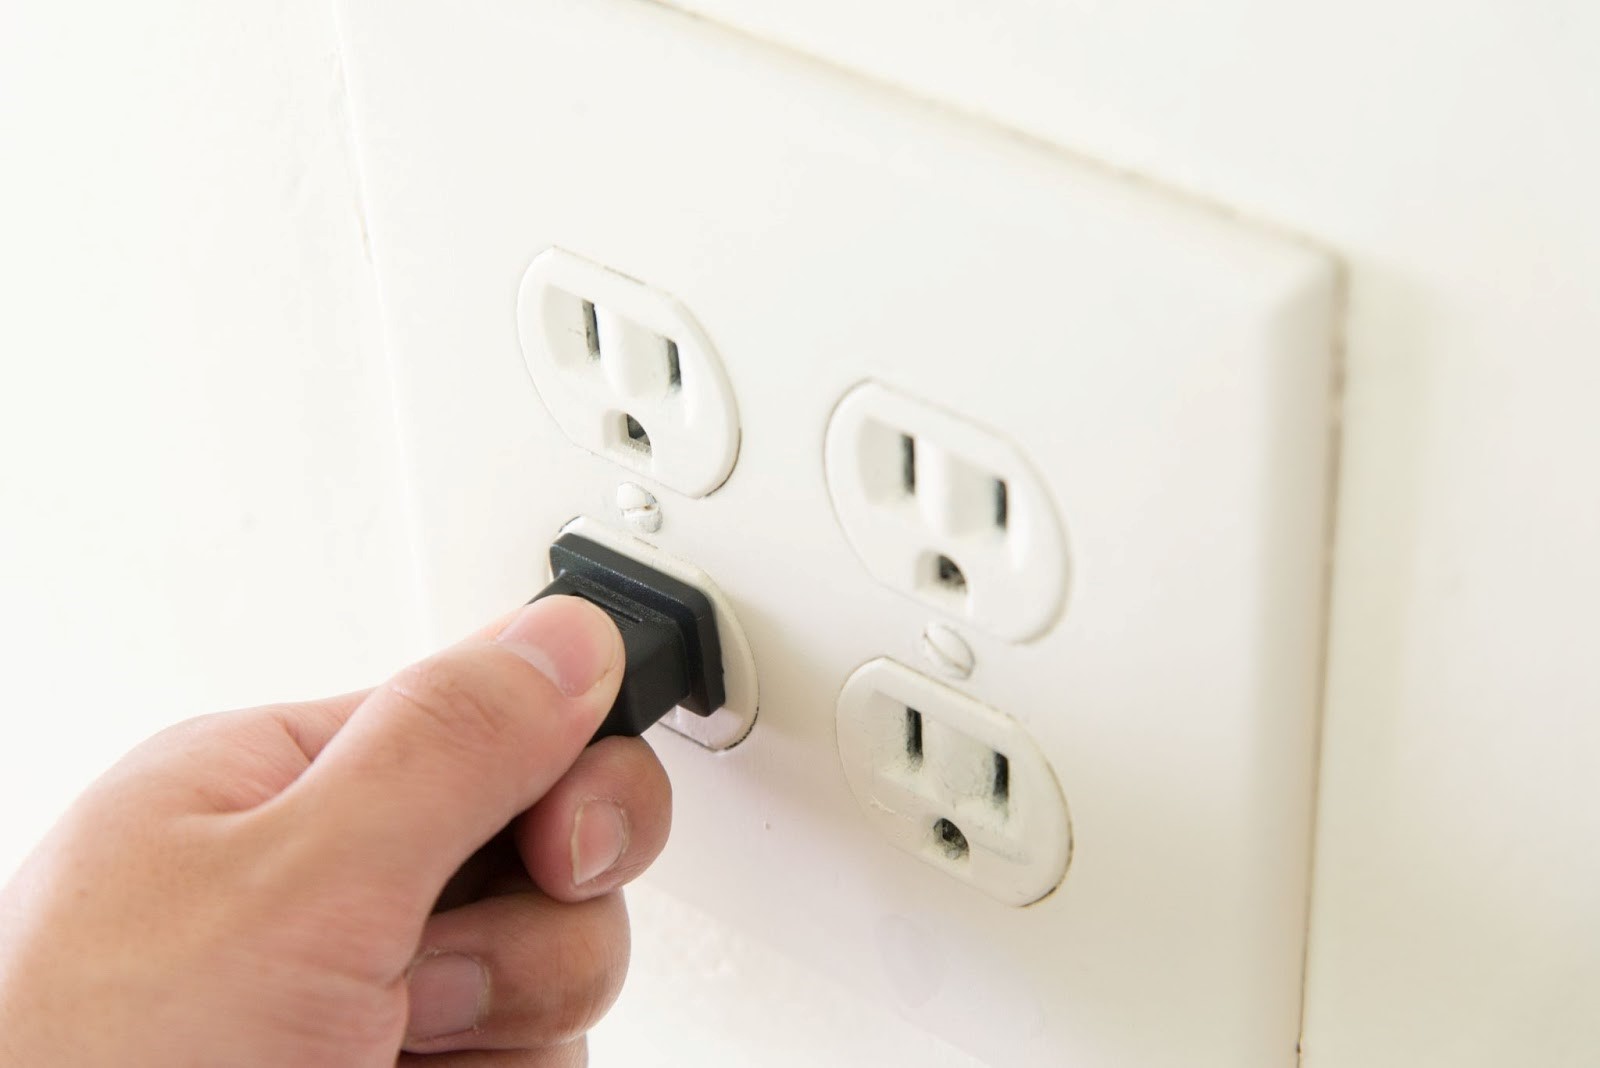 Plugging a cord into a double wall outlet